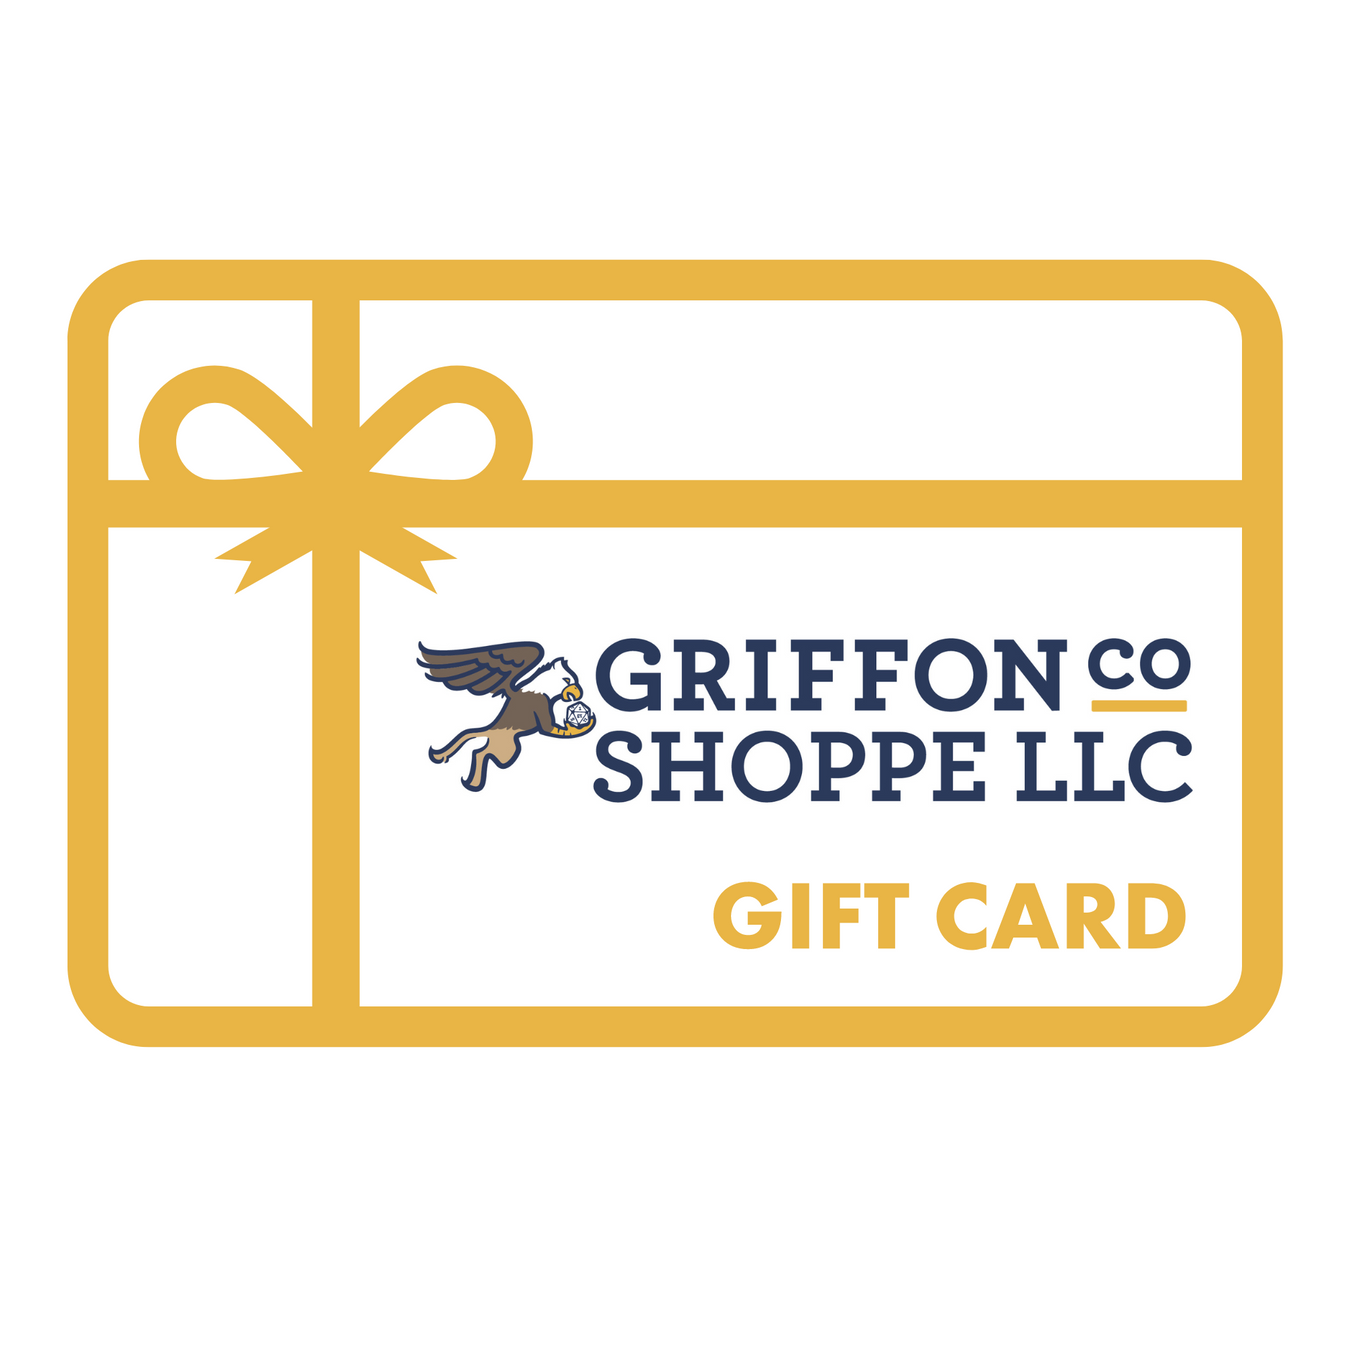 Gift Cards - GriffonCo 3D Printed Miniatures & Gifts